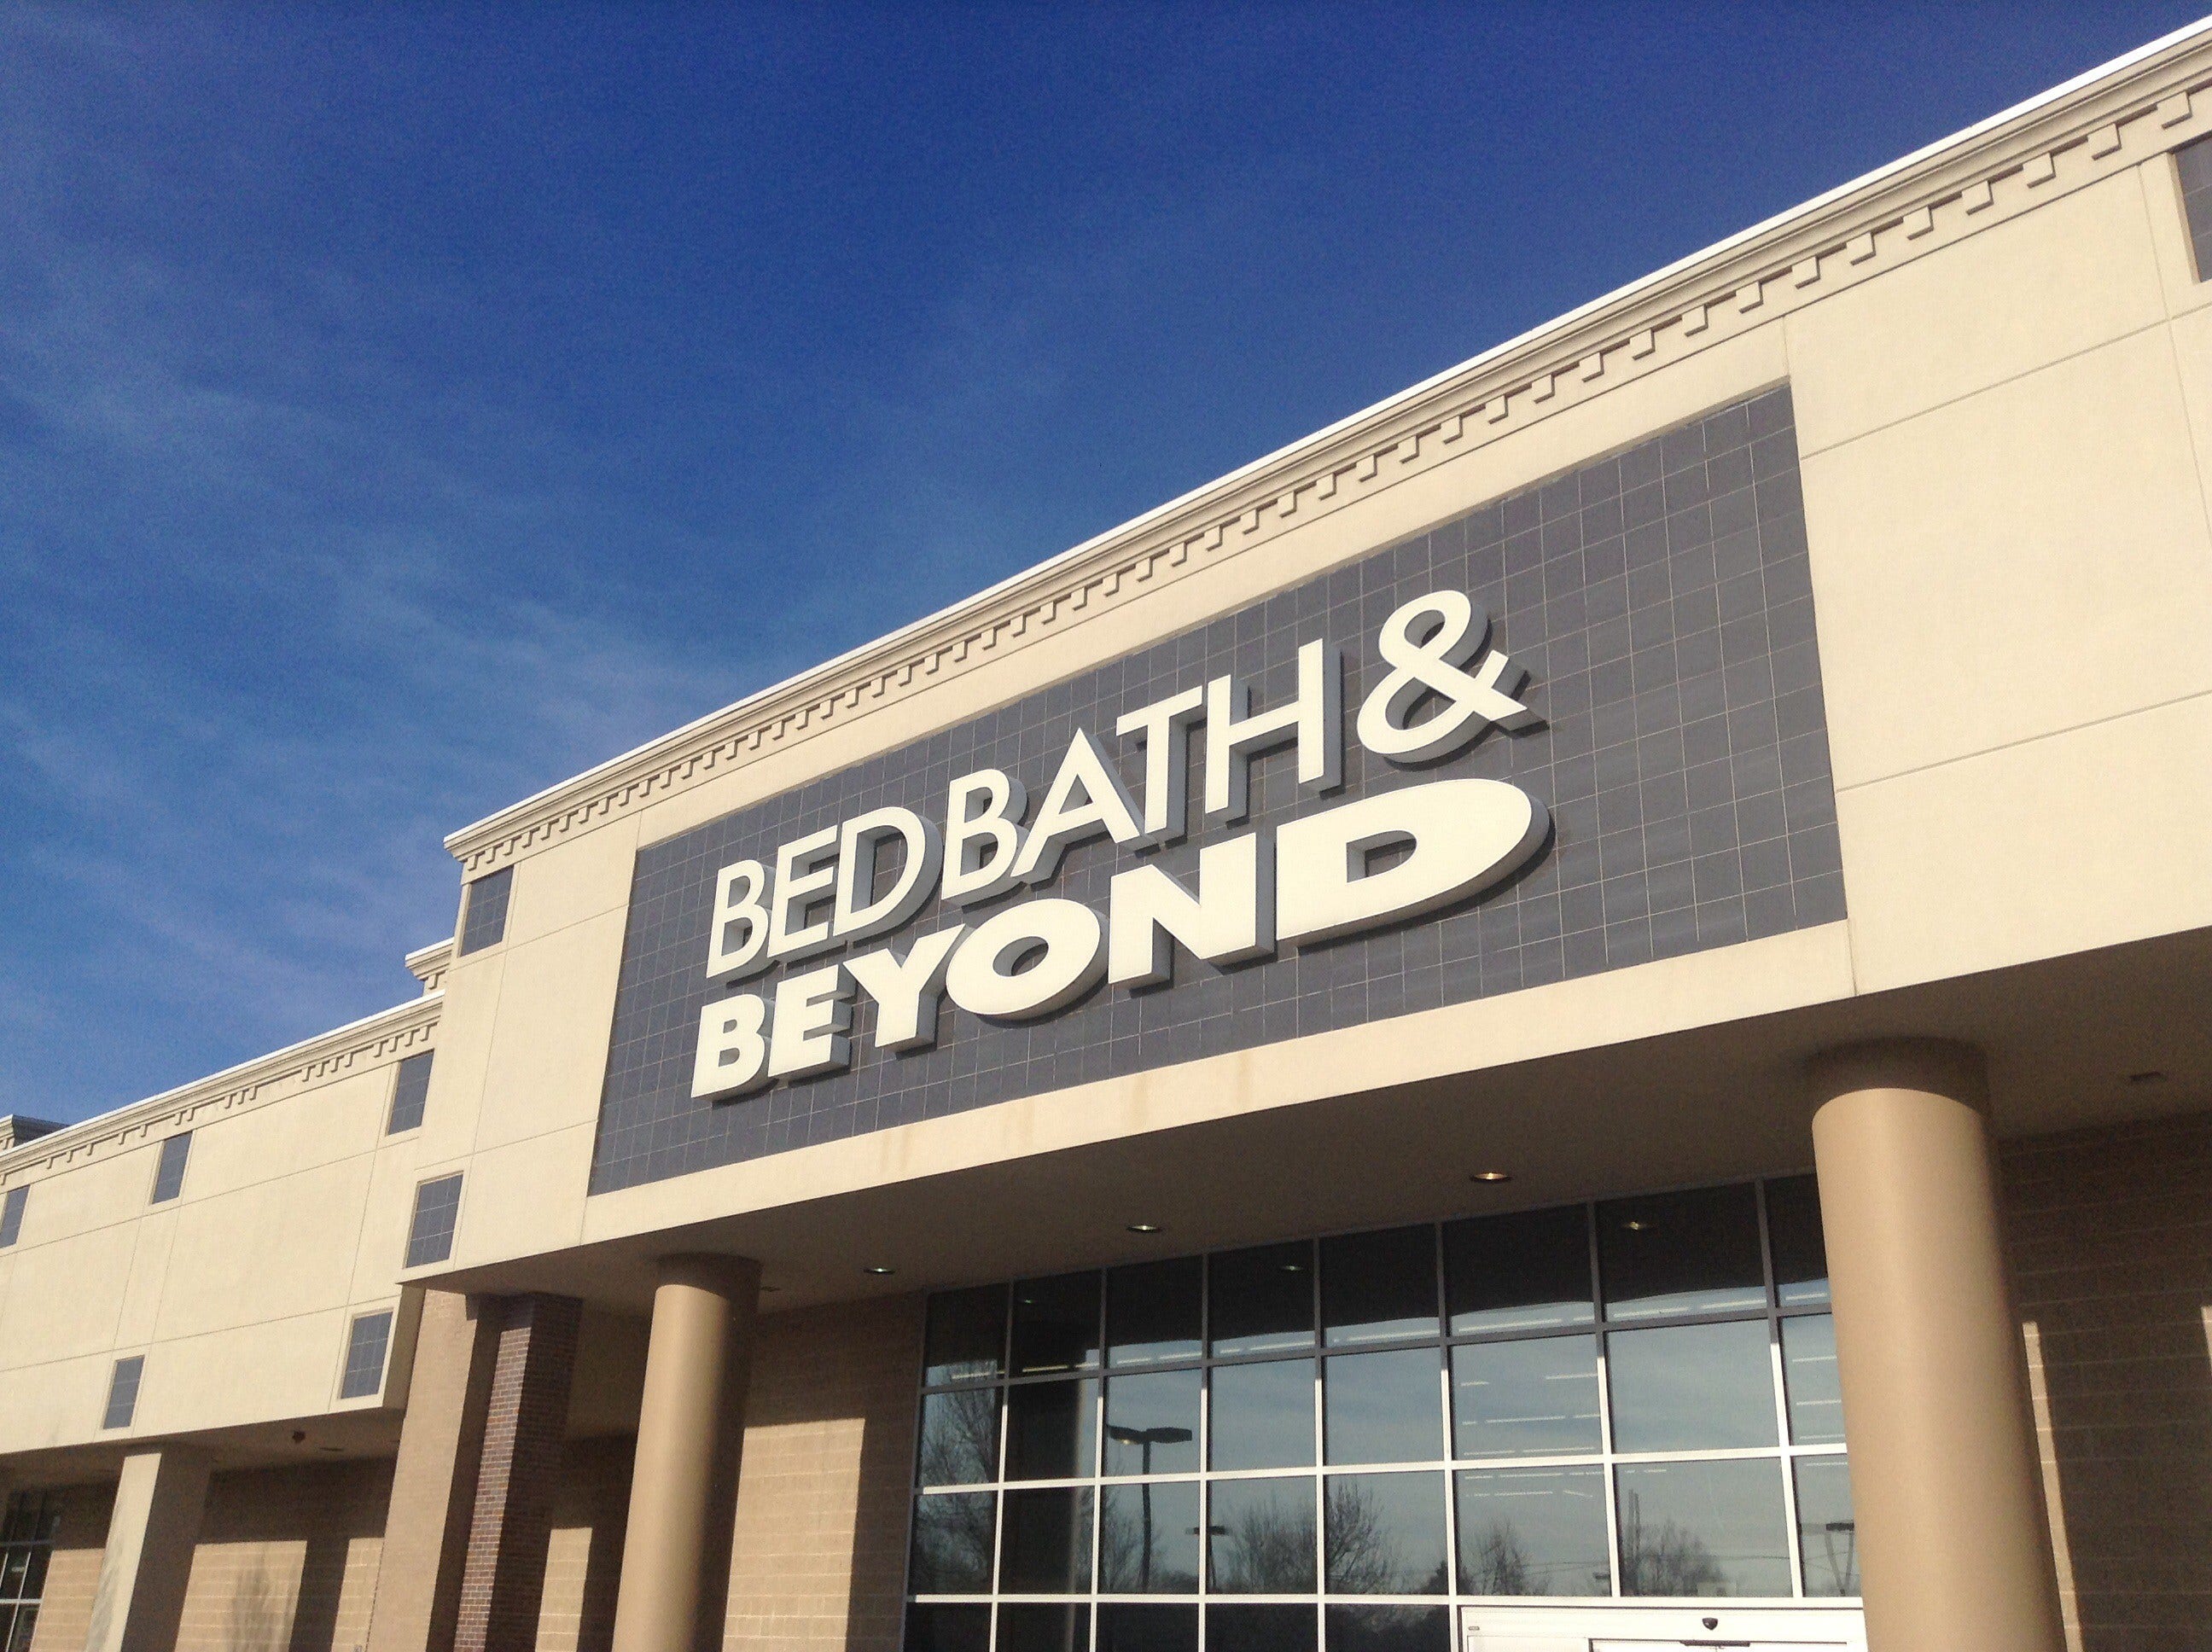 Bed Bath & Beyond Stock Spikes Despite Q2 Earnings Miss: Sales Fall 28%, Comps Down, Costs Lower